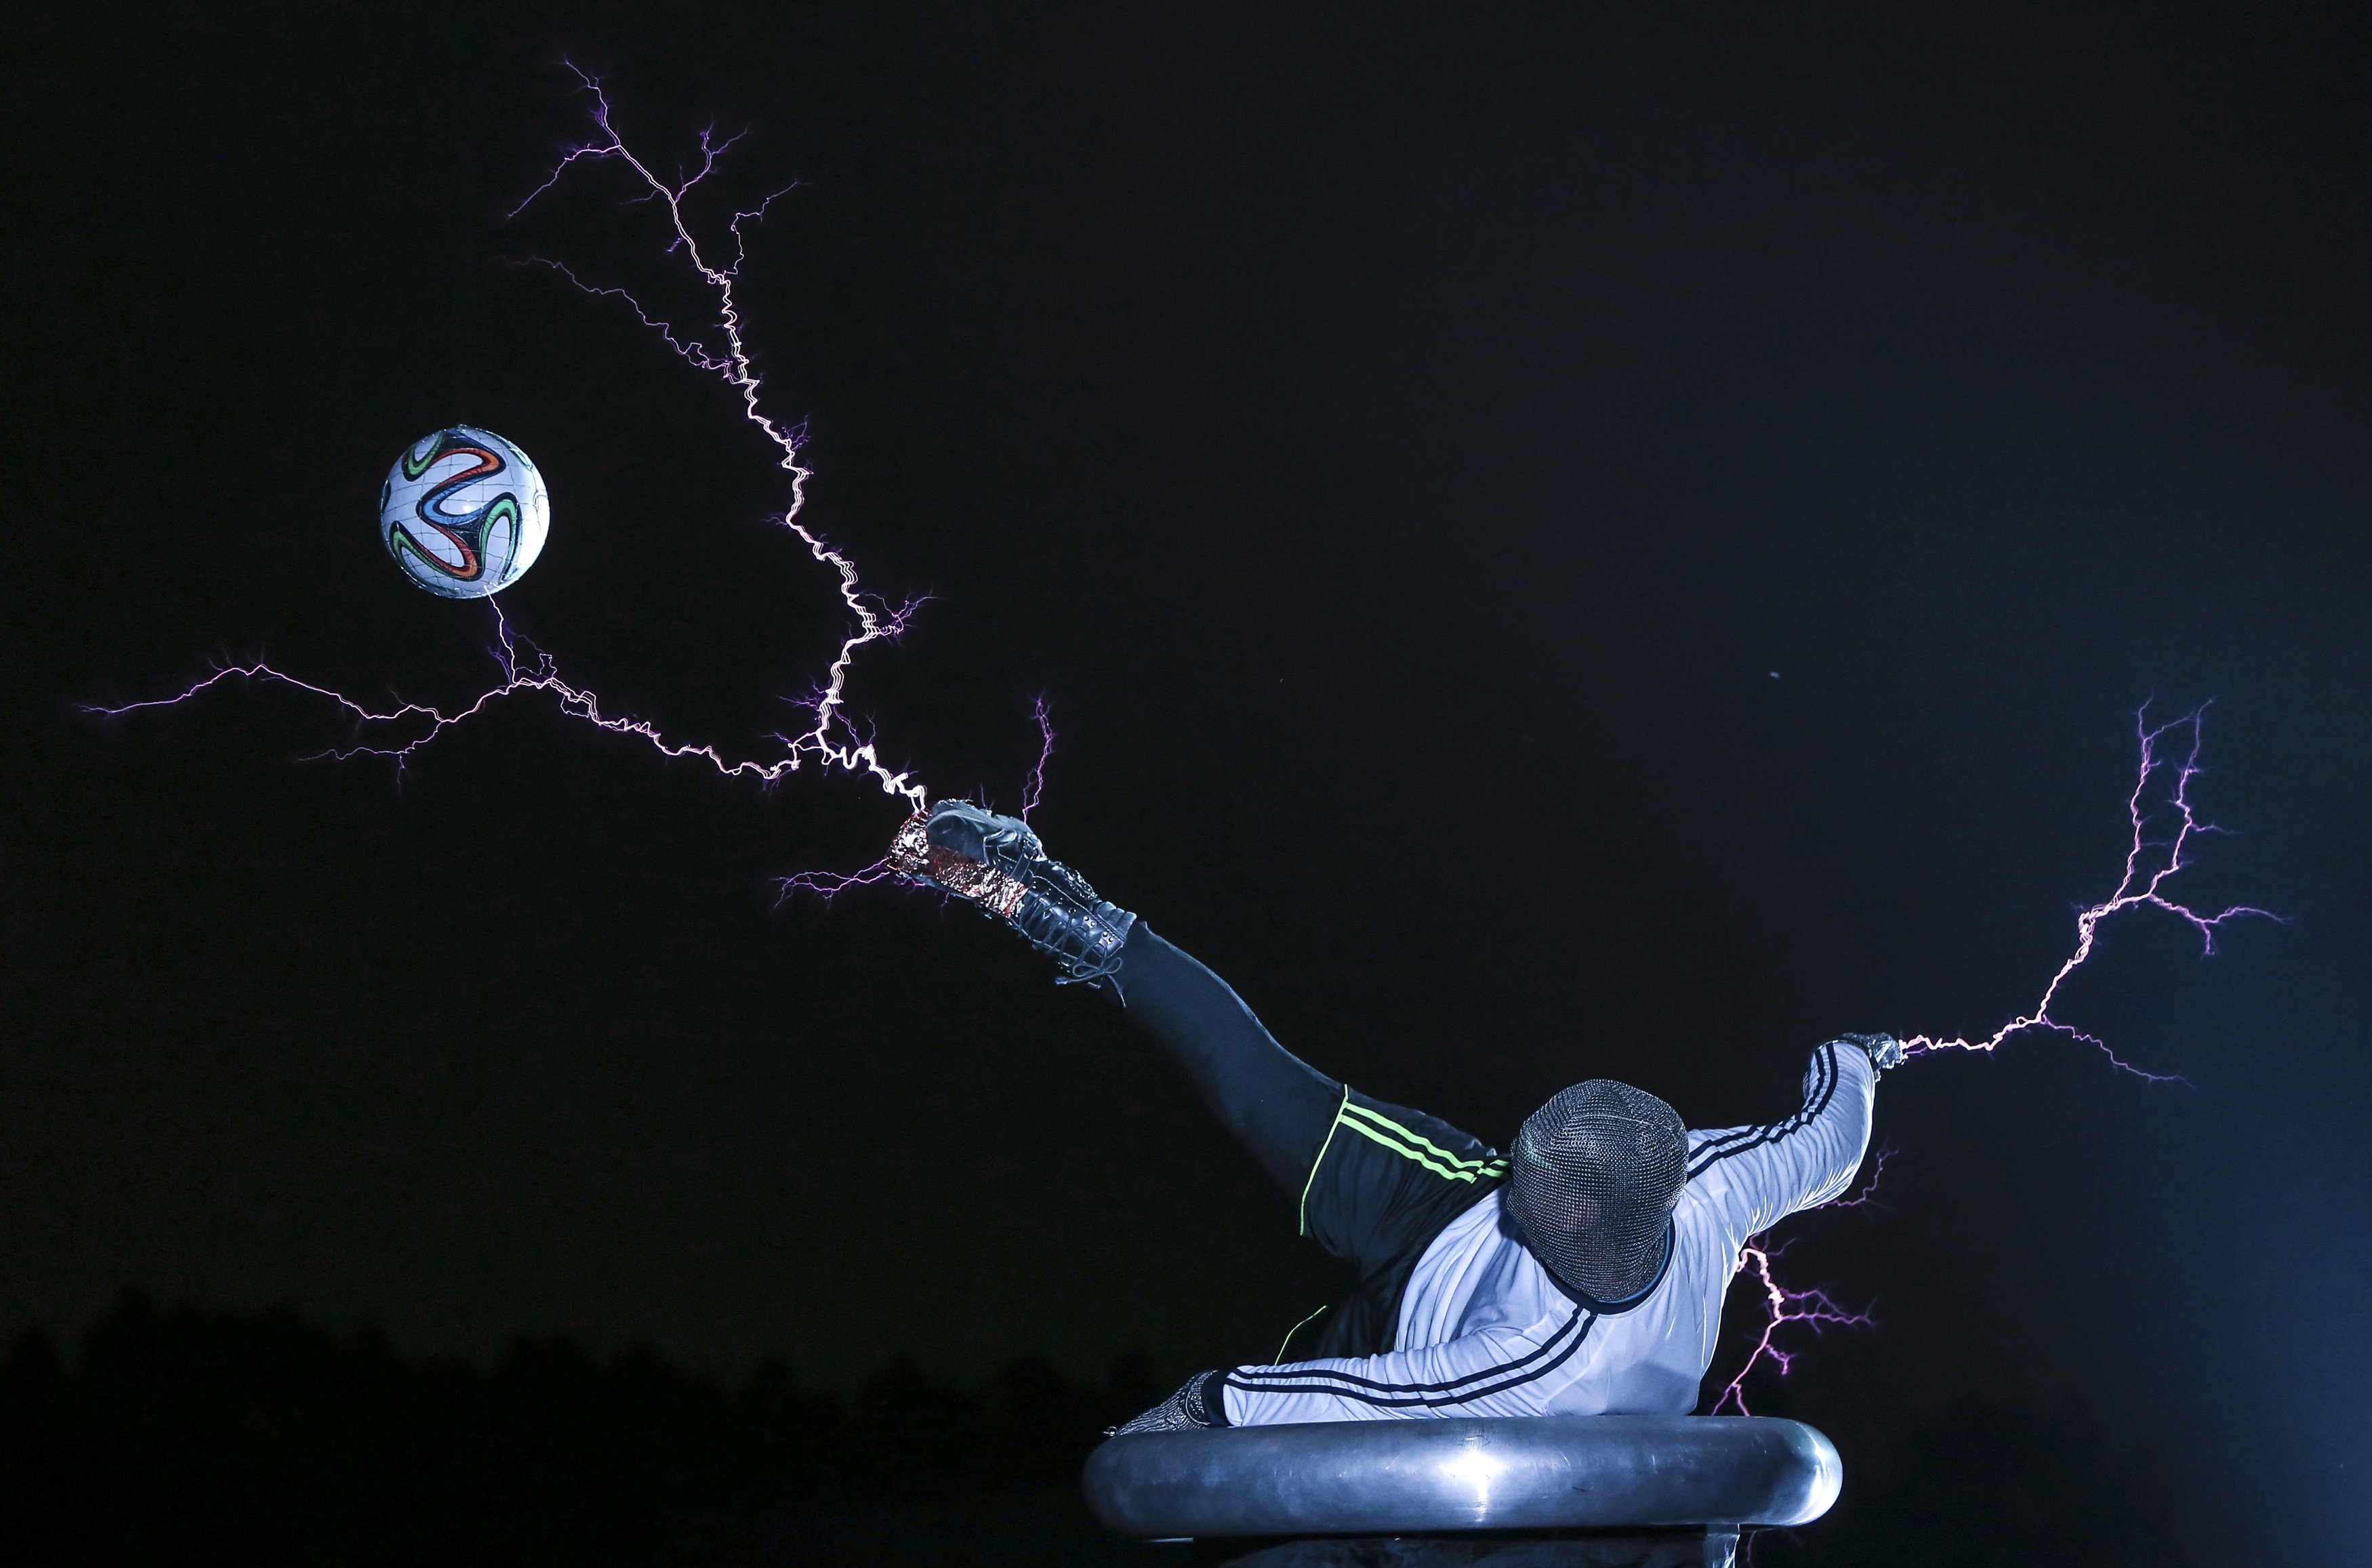 A member of the Thunderbolt Craziness band wearing a metal suit kicks a soccer ball as electricity is discharged from Tesla coils during a performance to celebrate the 2014 Brazil World Cup, in Changle, Fujian province, China on June 12, 2014.